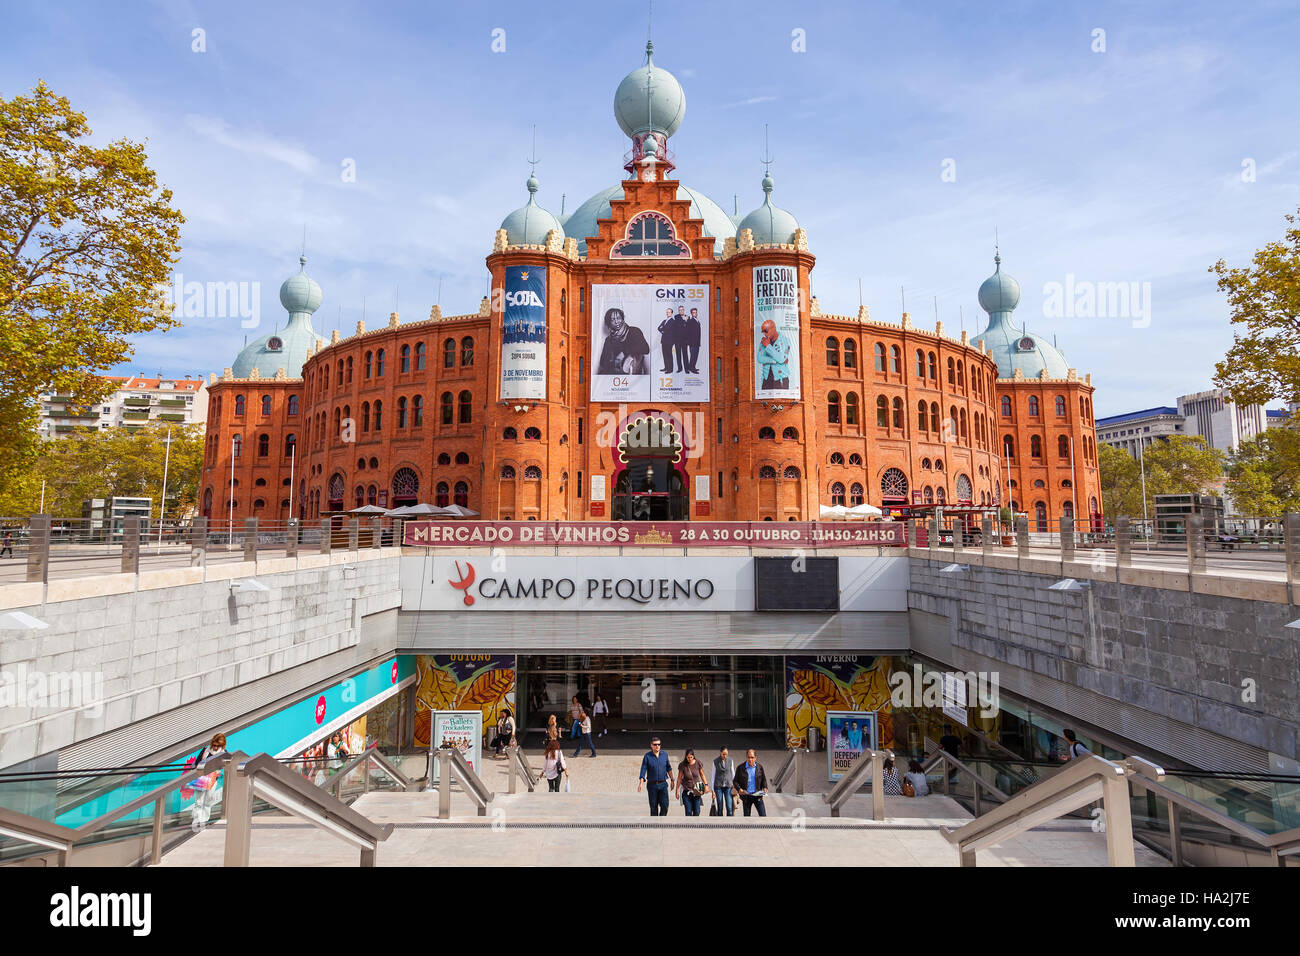 Campo Pequeno Bullring Arena and entrance to the underground shopping mall. Hosts concerts, fairs, exhibitions and other events. Stock Photo